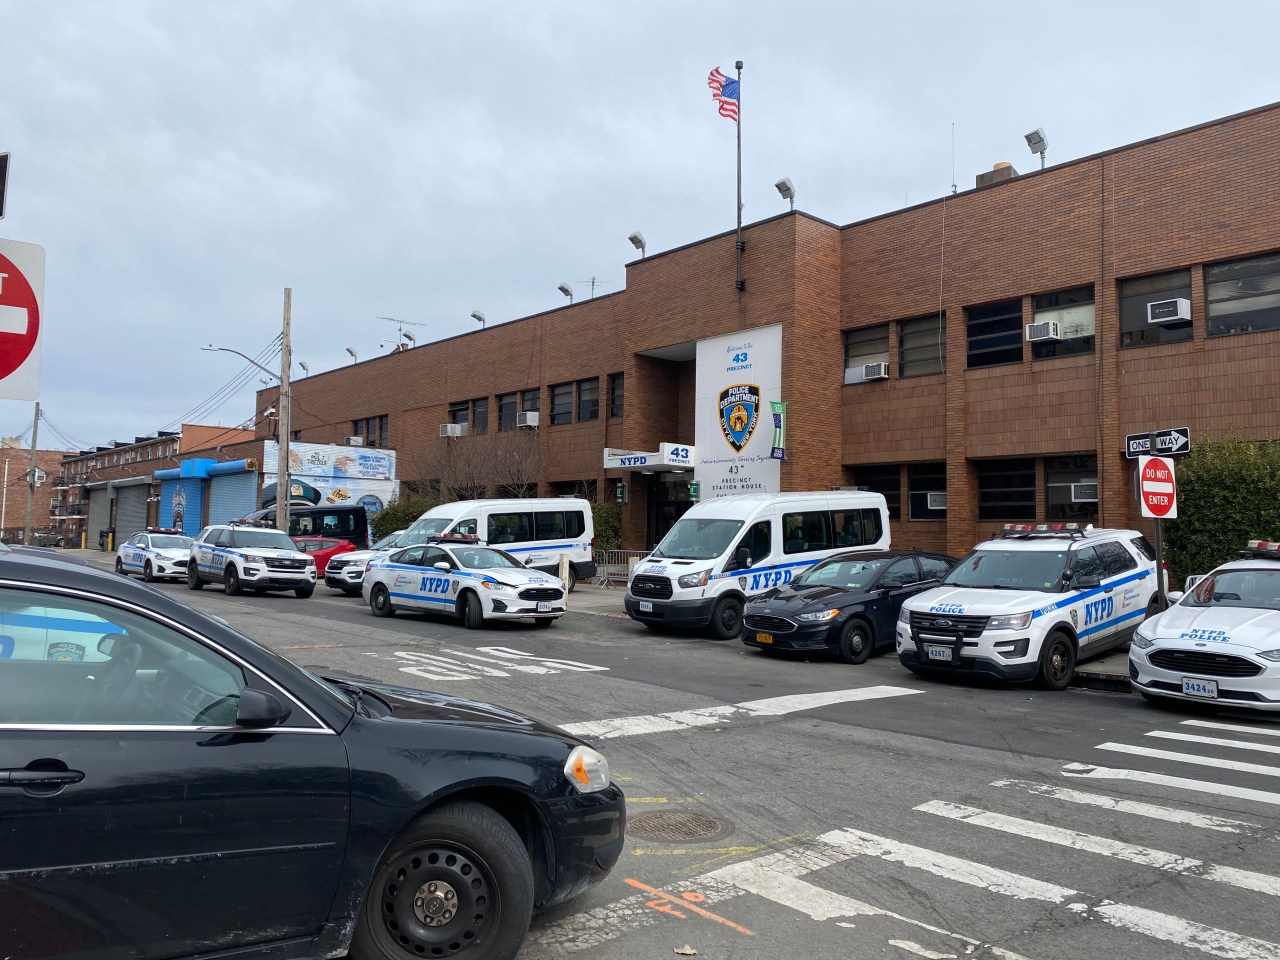 The 43rd Precinct stationhouse on Story Avenue in Soundview.